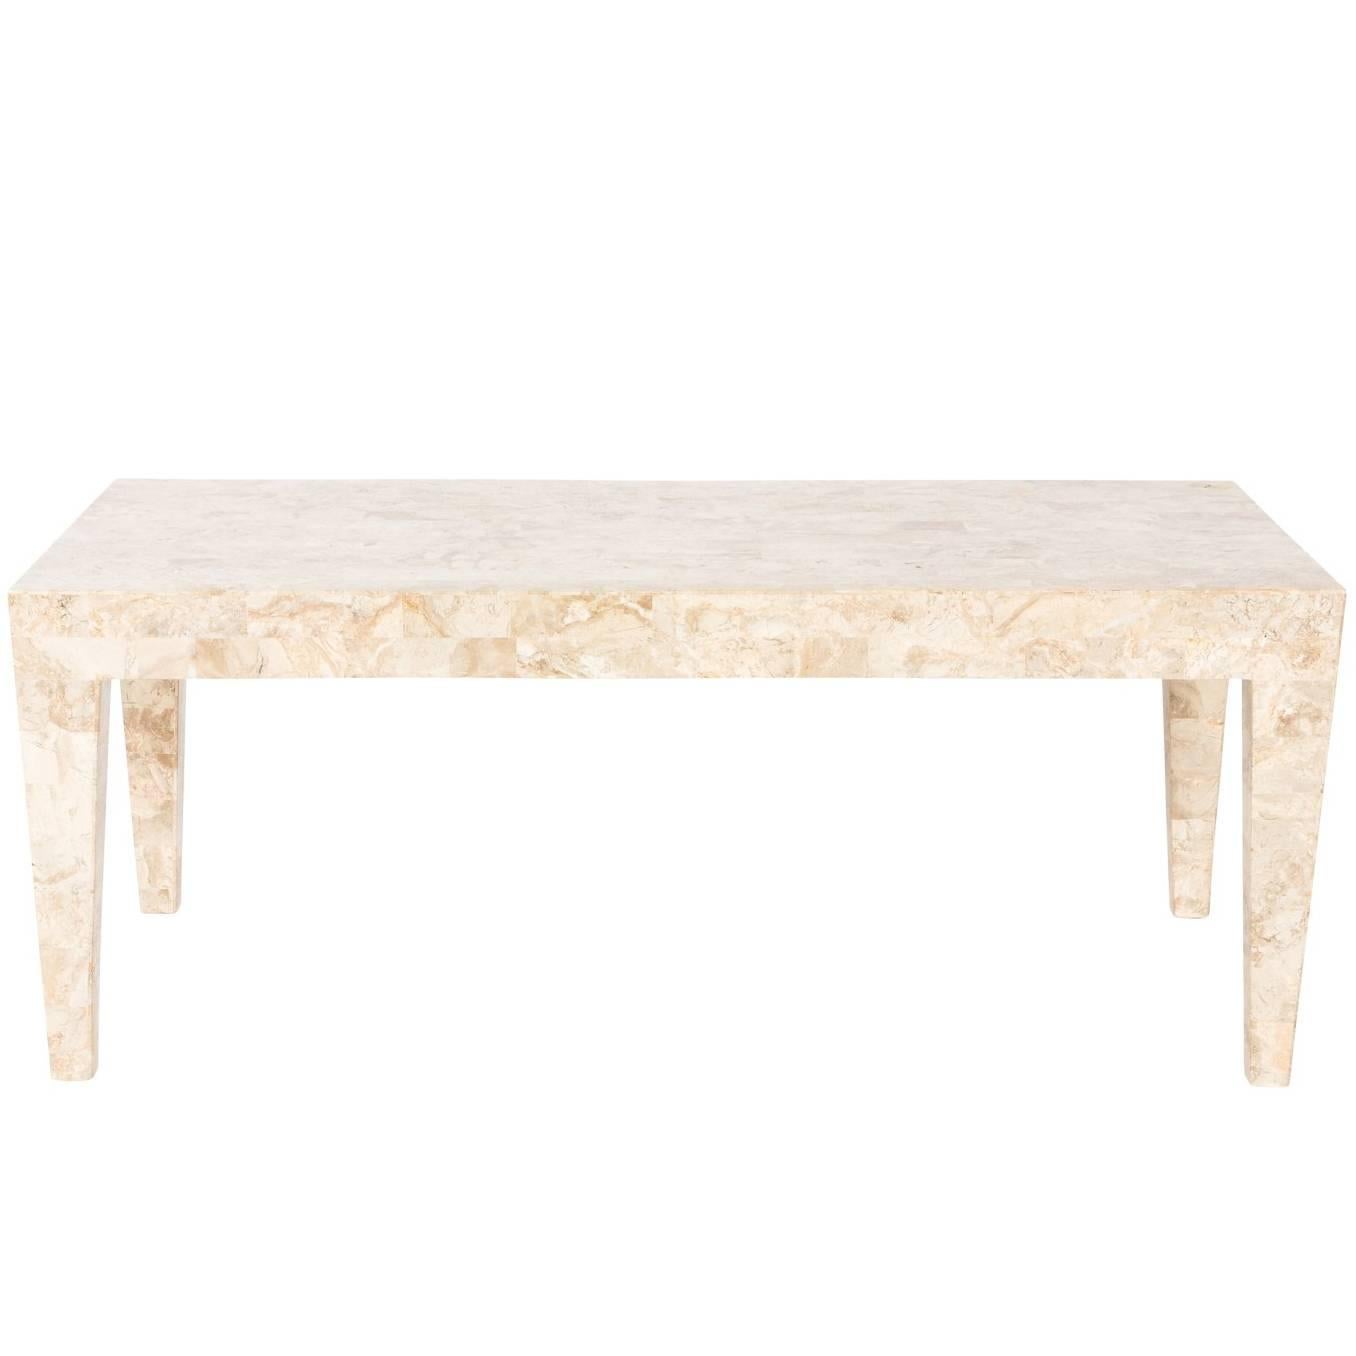 Tessellated Stone Coffee Table For Sale